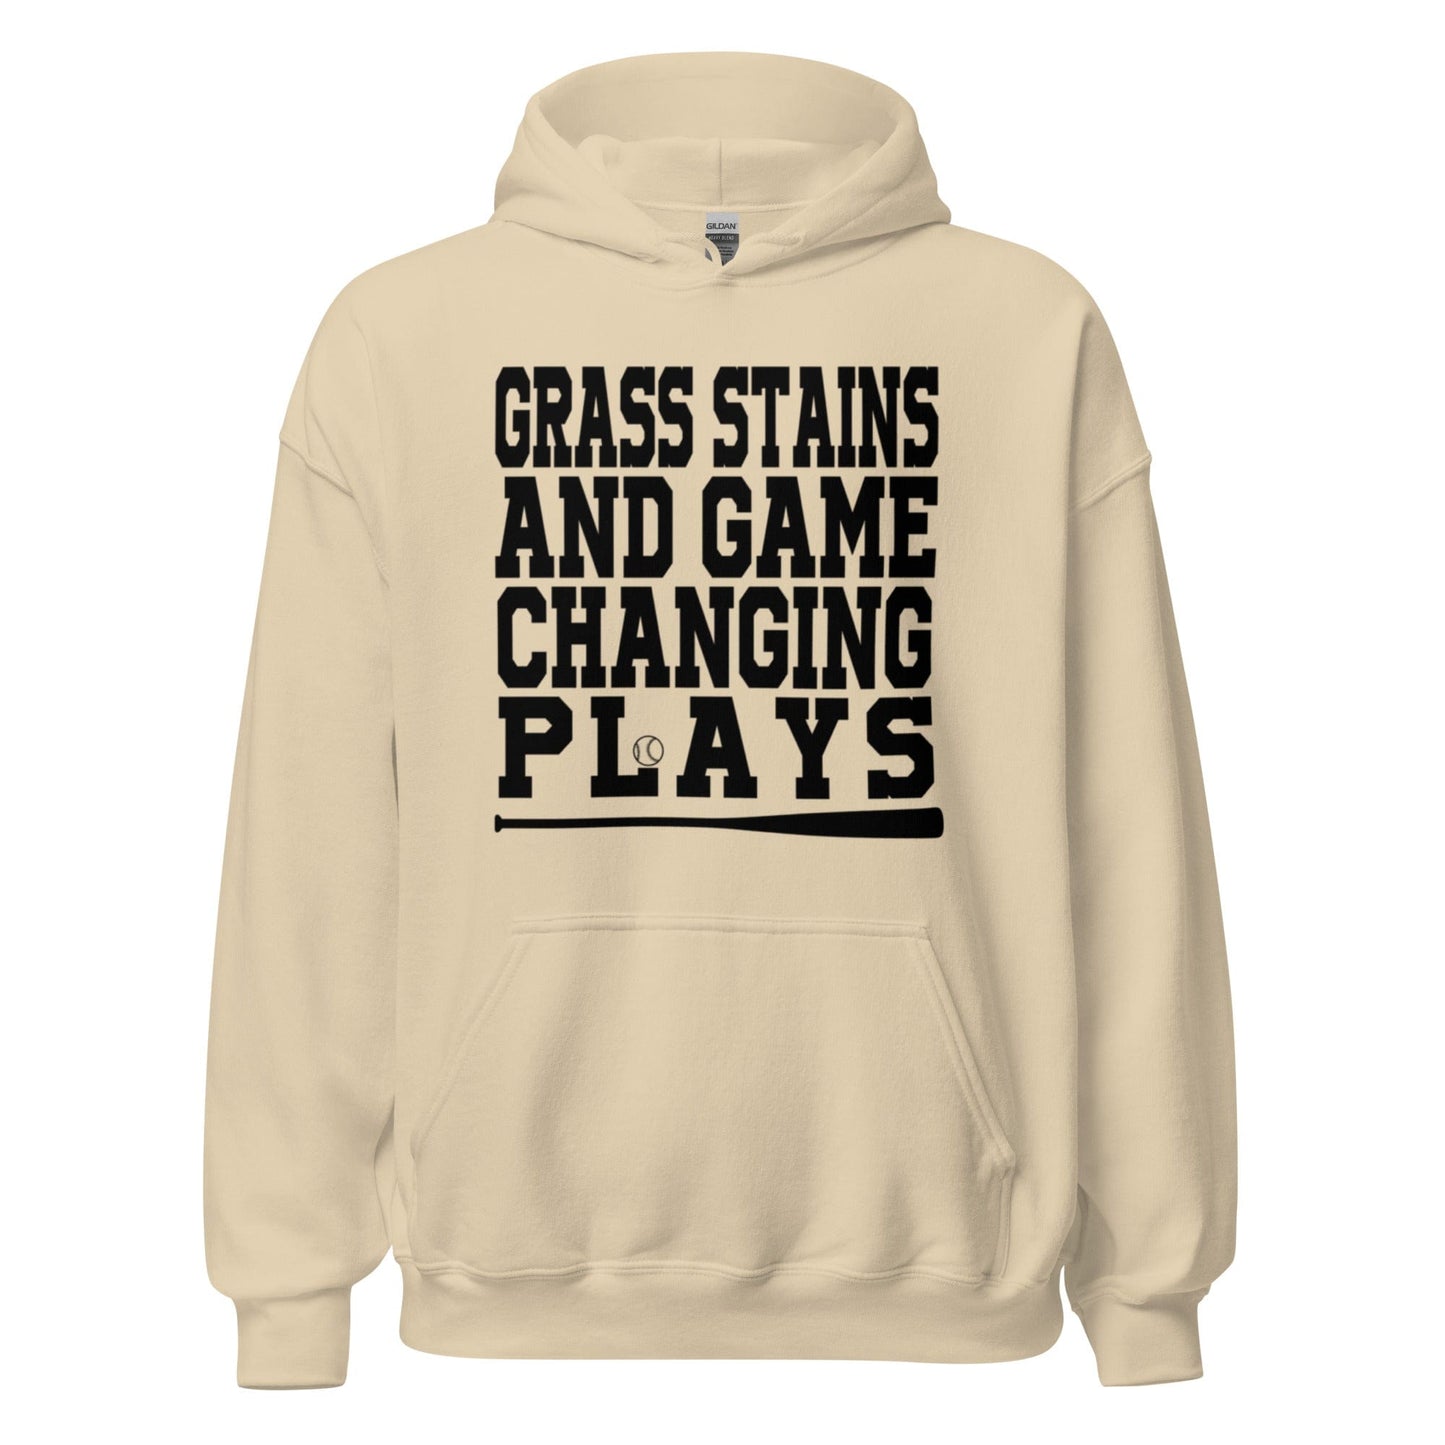 Grass Stains And Game Changing Plays - Adult Hoodie